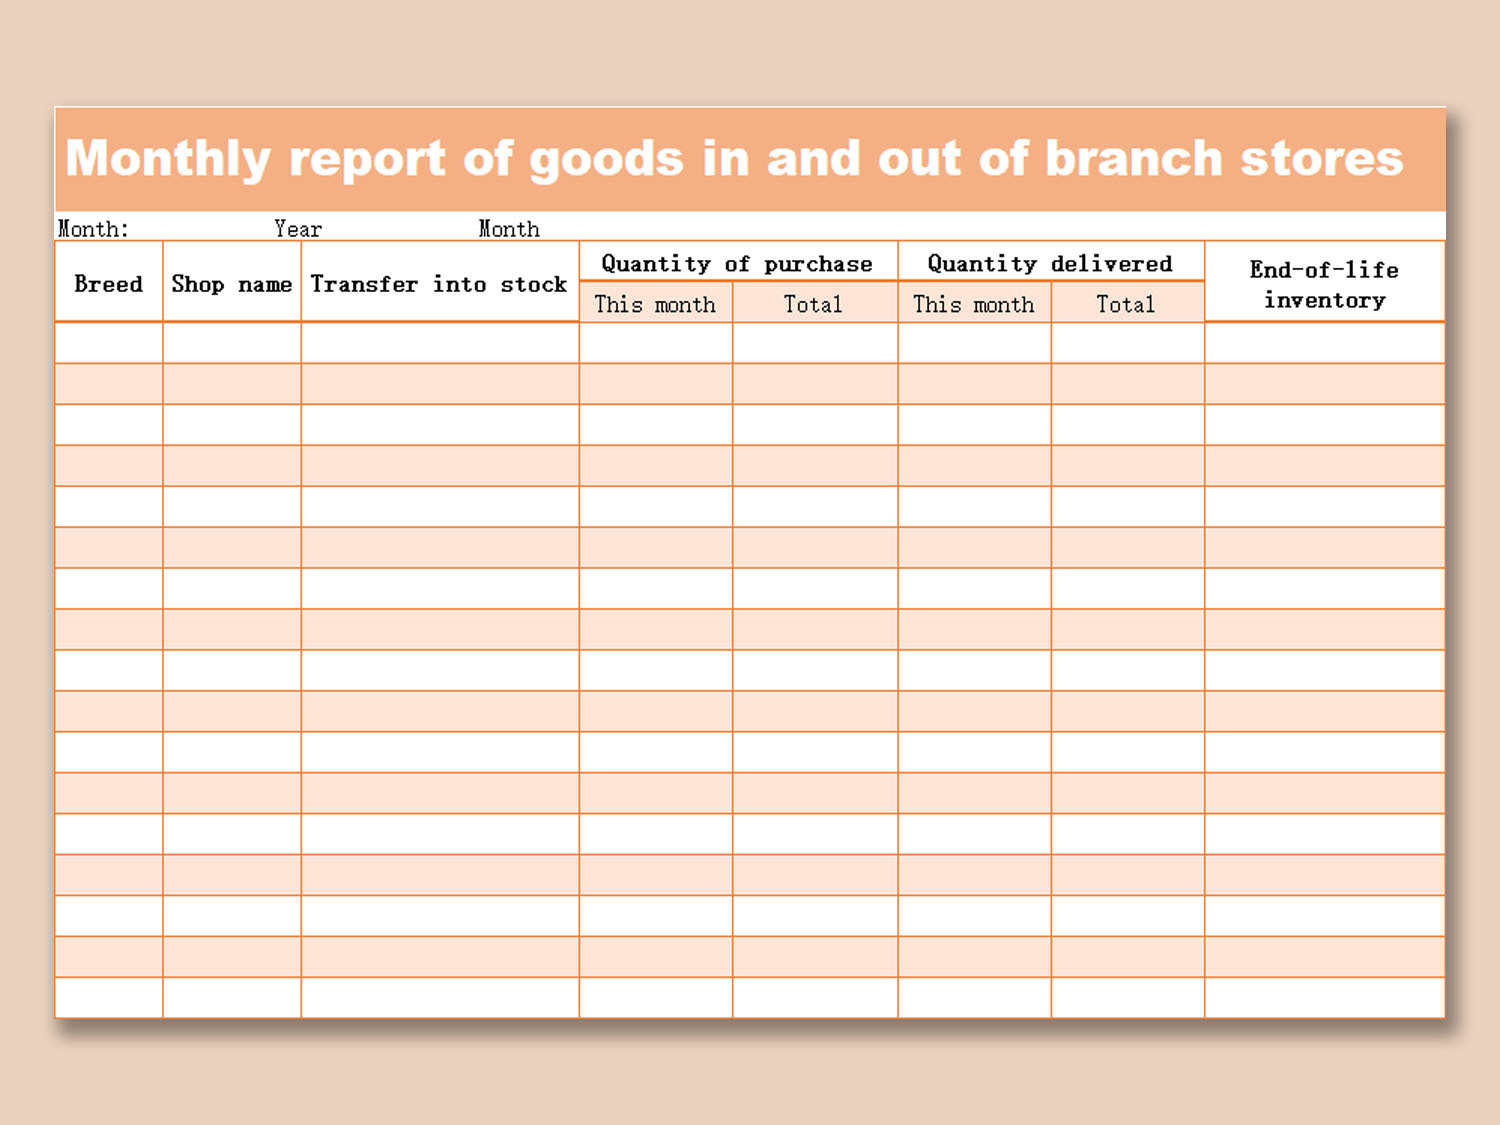 EXCEL of Monthly Report of Goods in and out of Branch Stores.xlsx